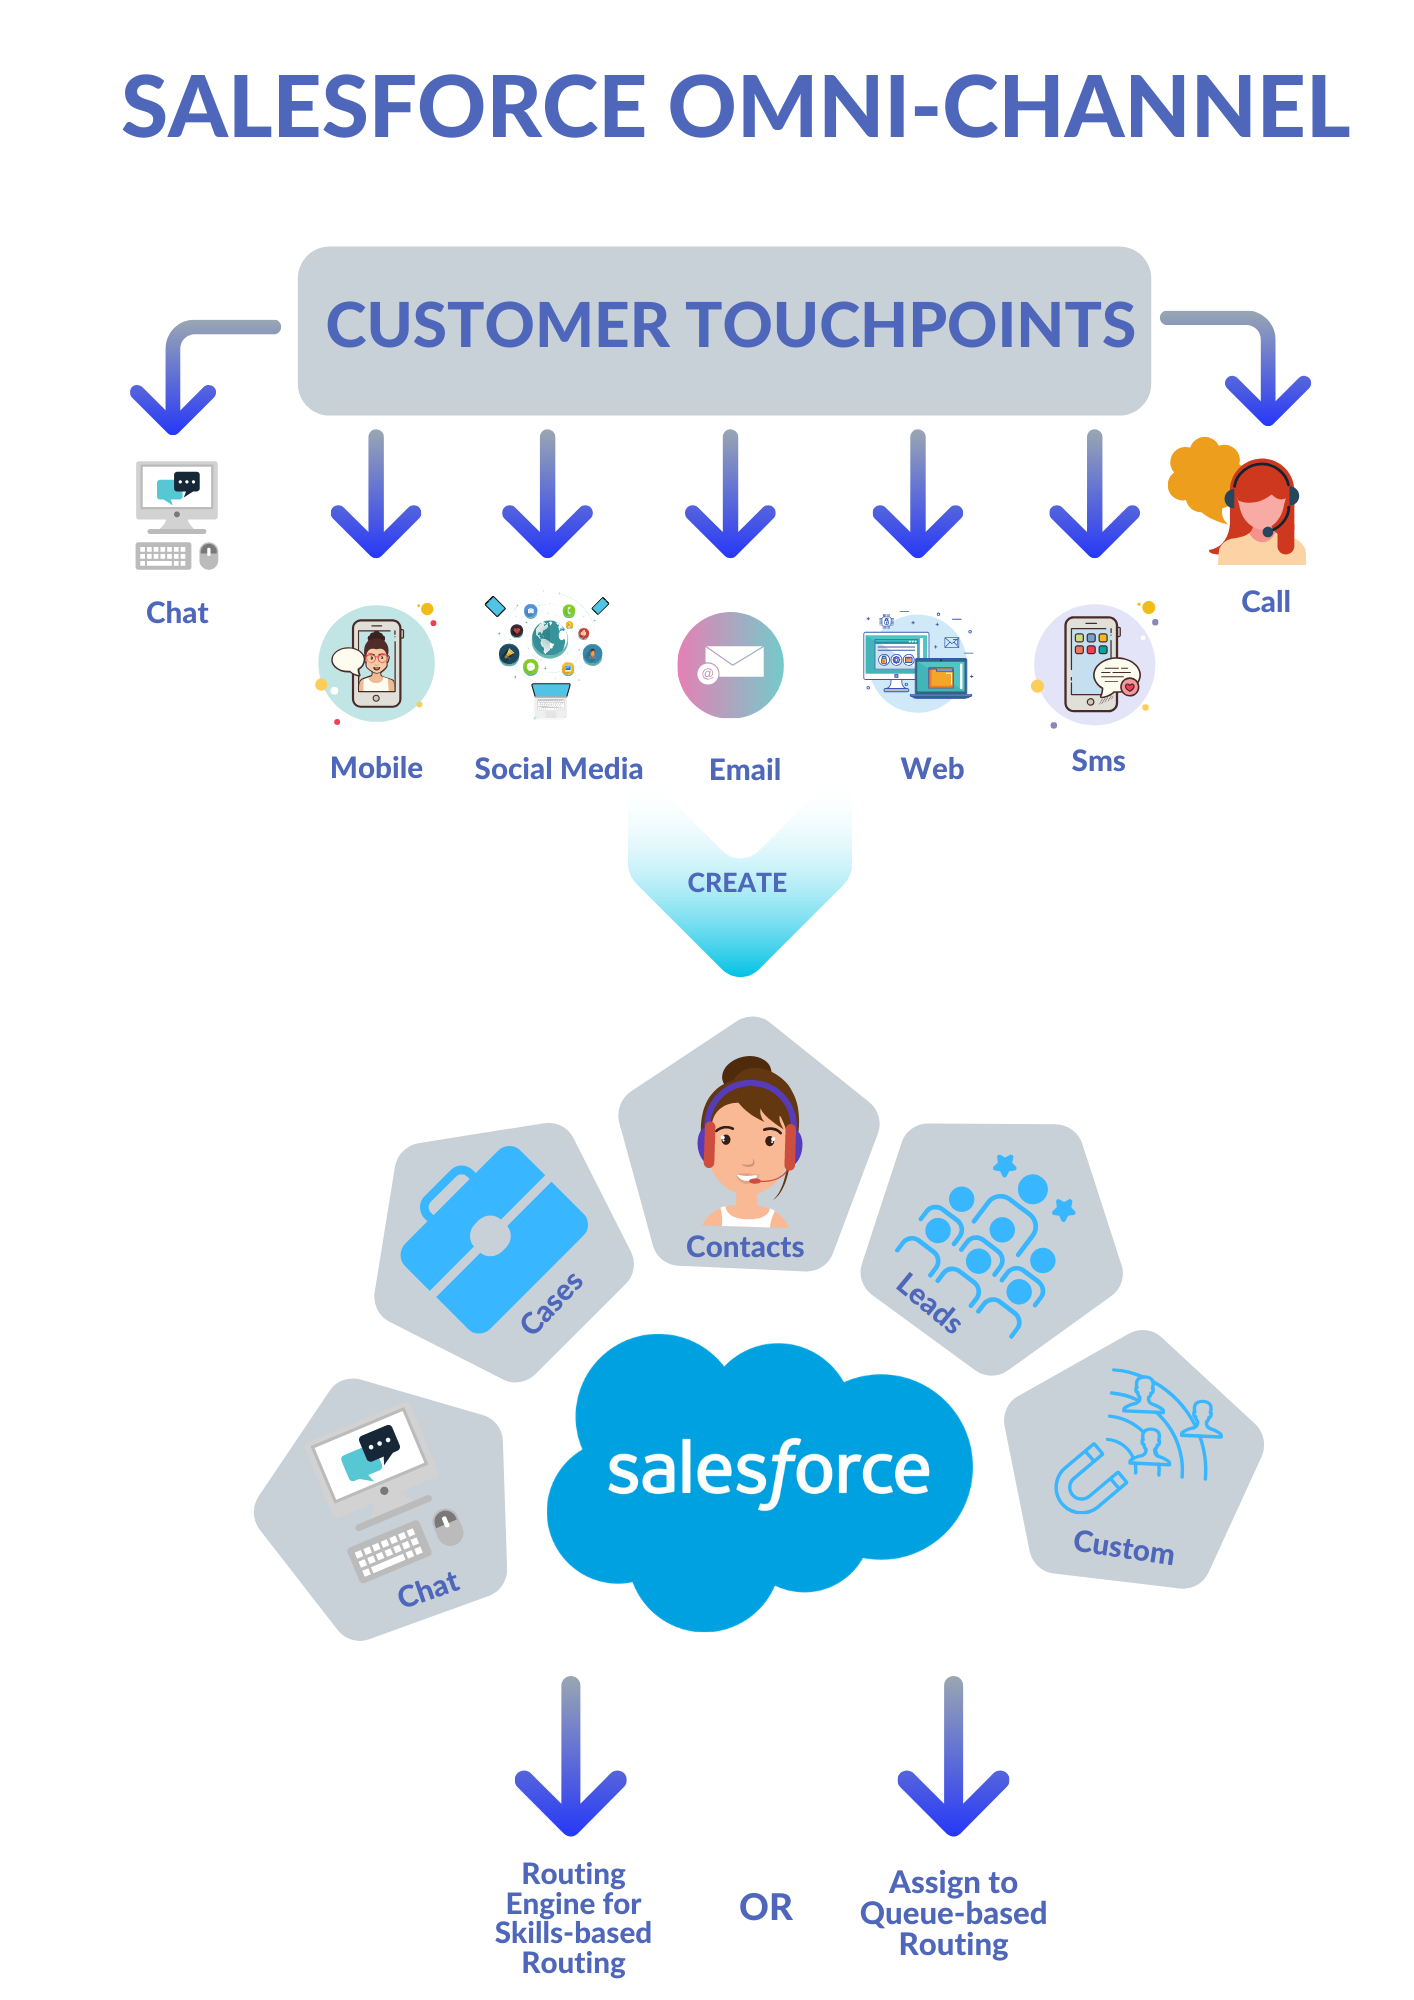 What is Omni-Channel Salesforce